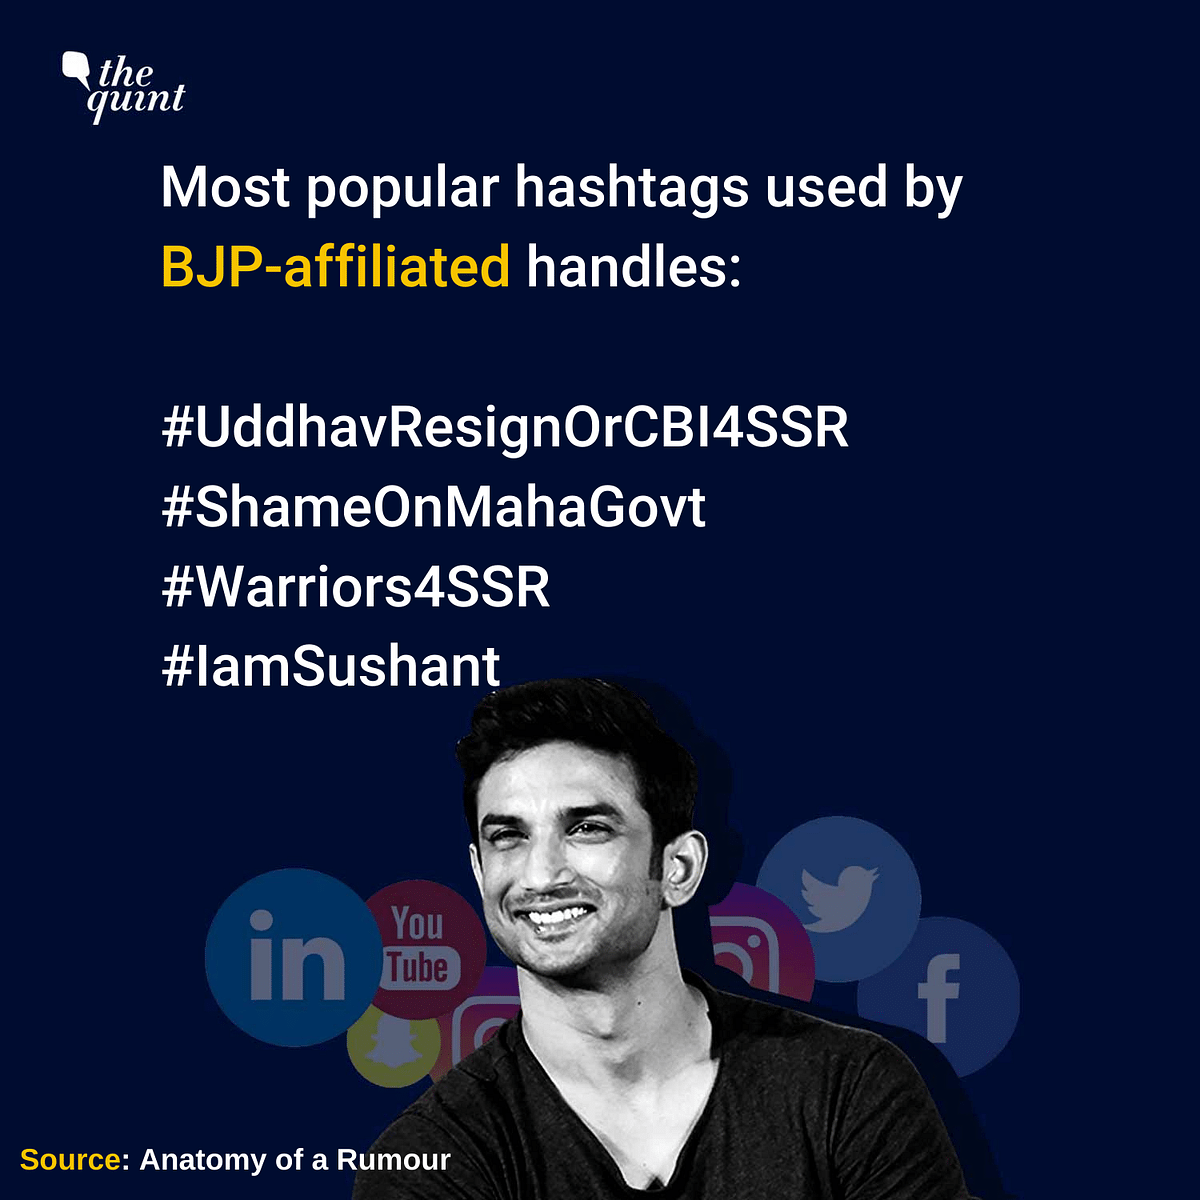 Here’s an analysis of all the social media keywords and hashtags used to talk about Sushant Singh Rajput death case.